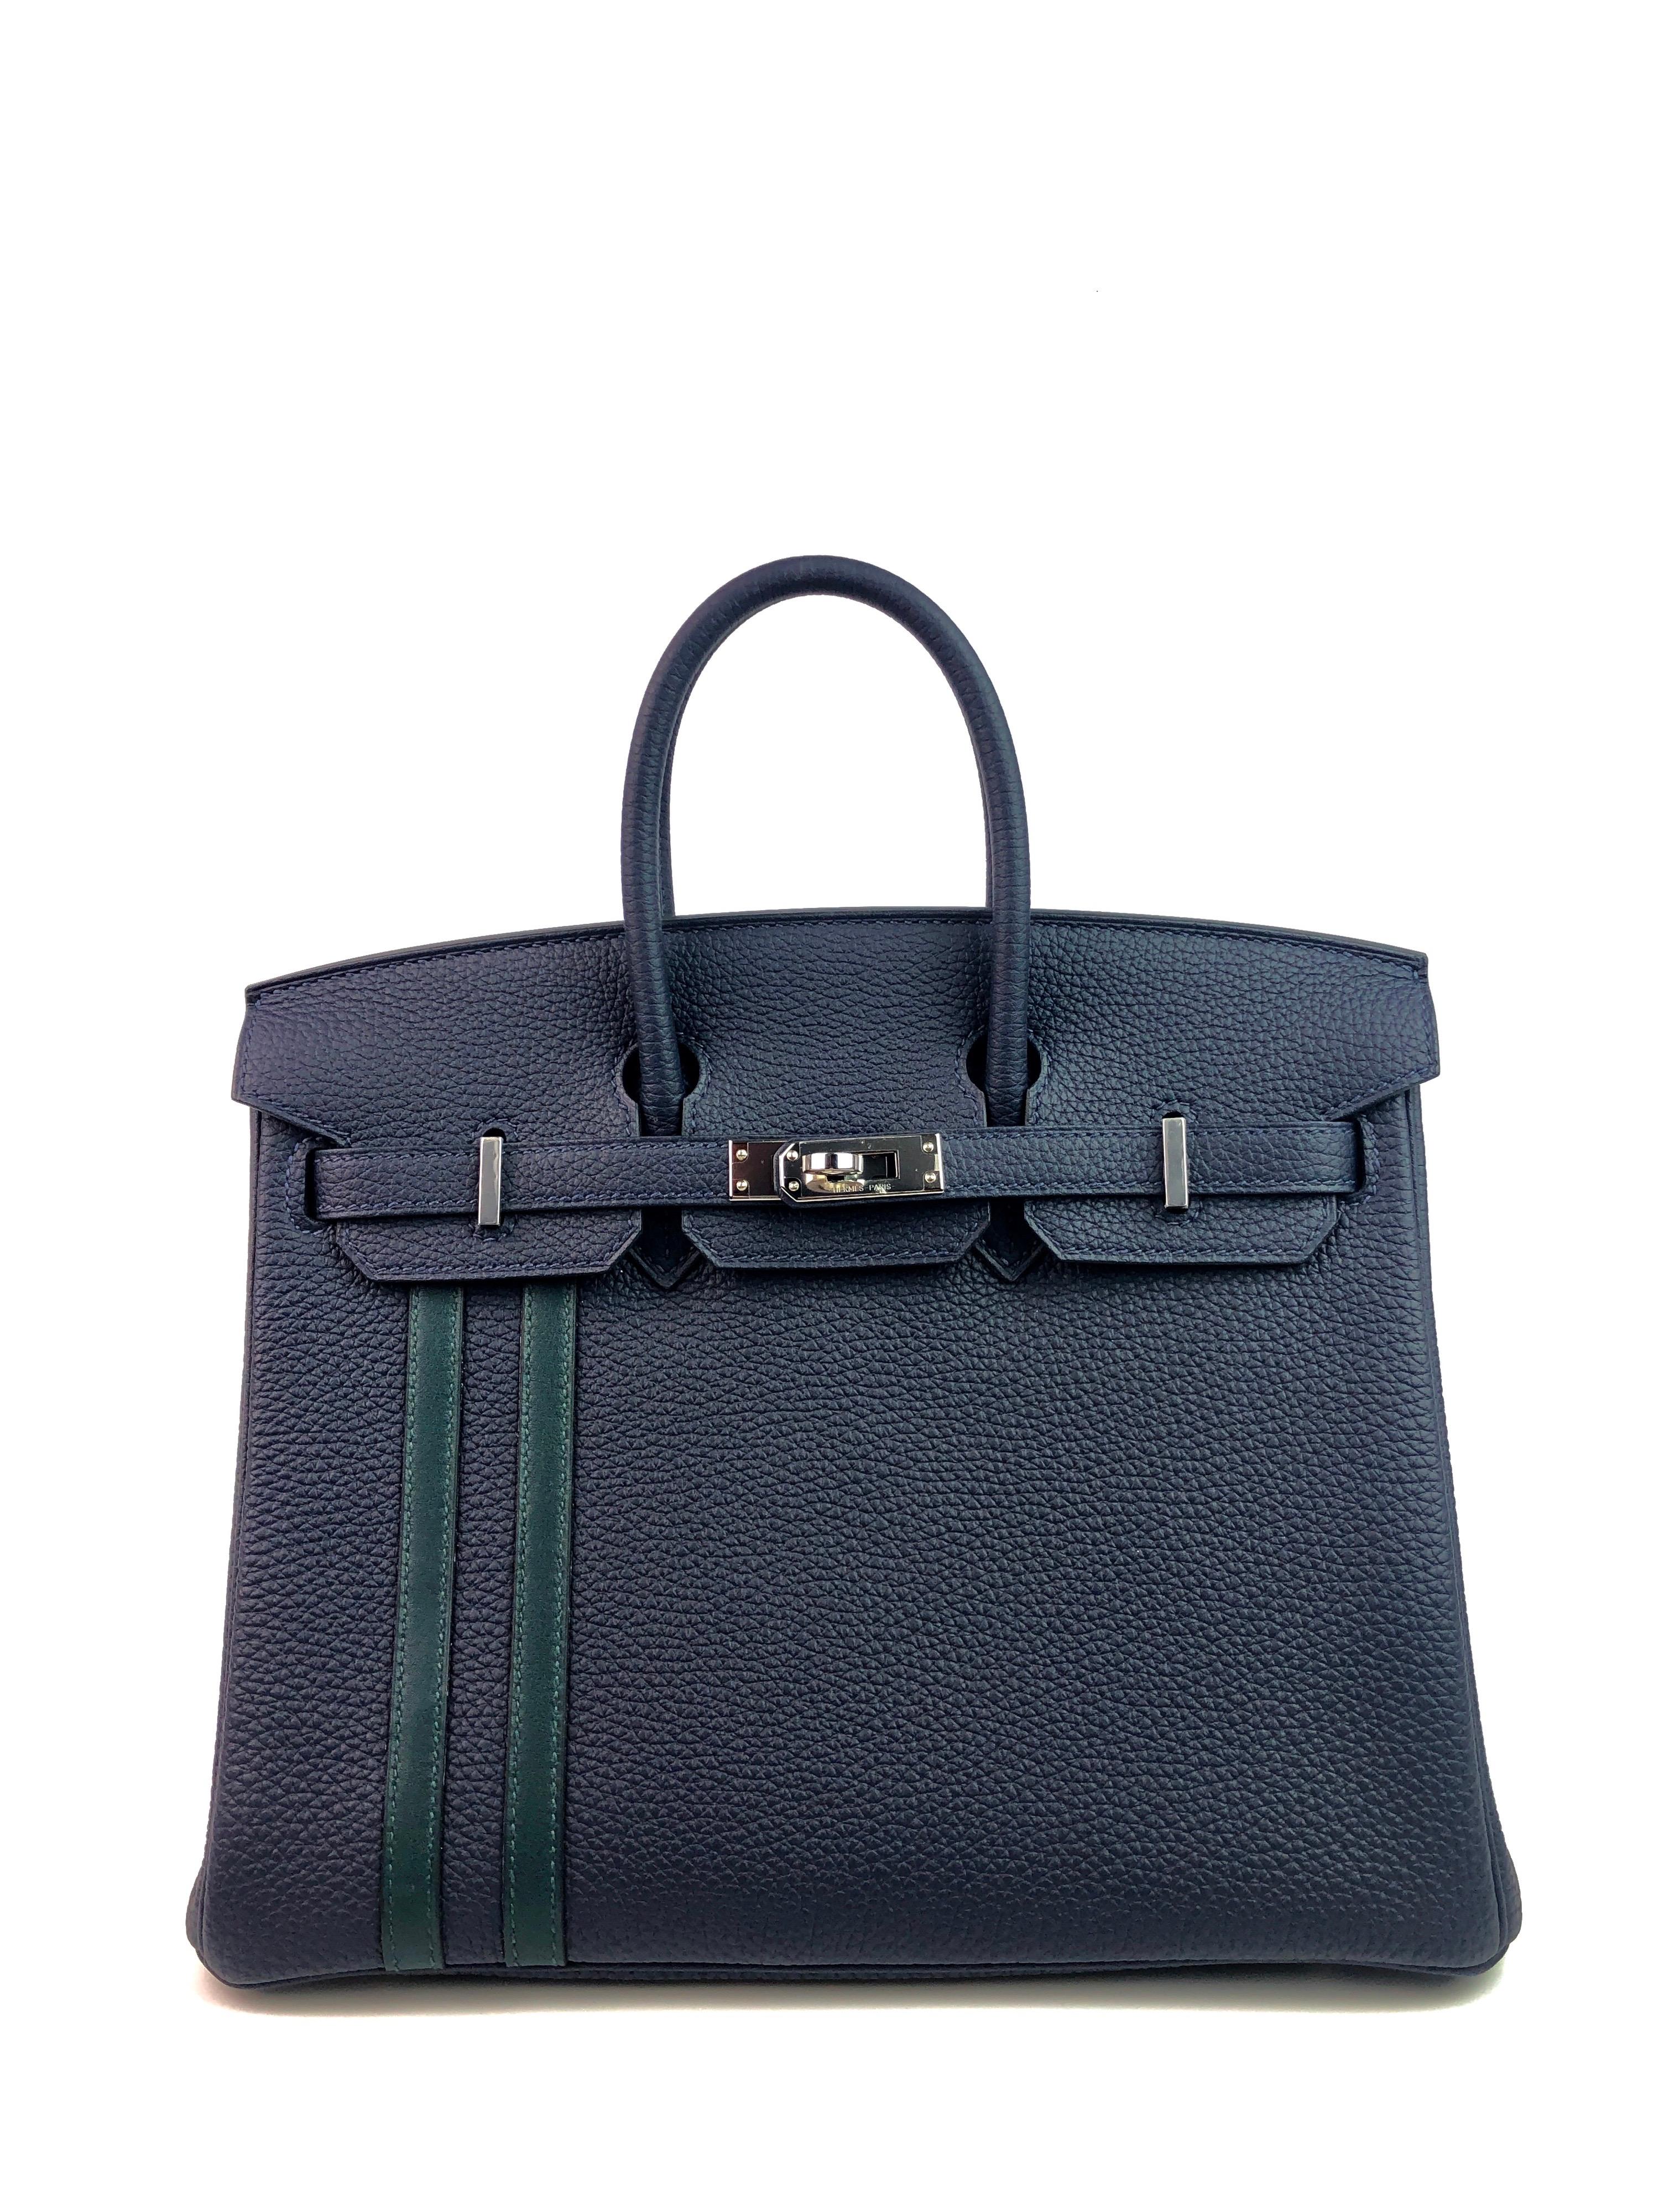 Stunning New Limited Edition Hermès Birkin 25 Officier Blue Nuit & Very Cypress. 2018 C Stamp. 

Shop with confidence from Lux Addicts. Authenticity Guaranteed! 
